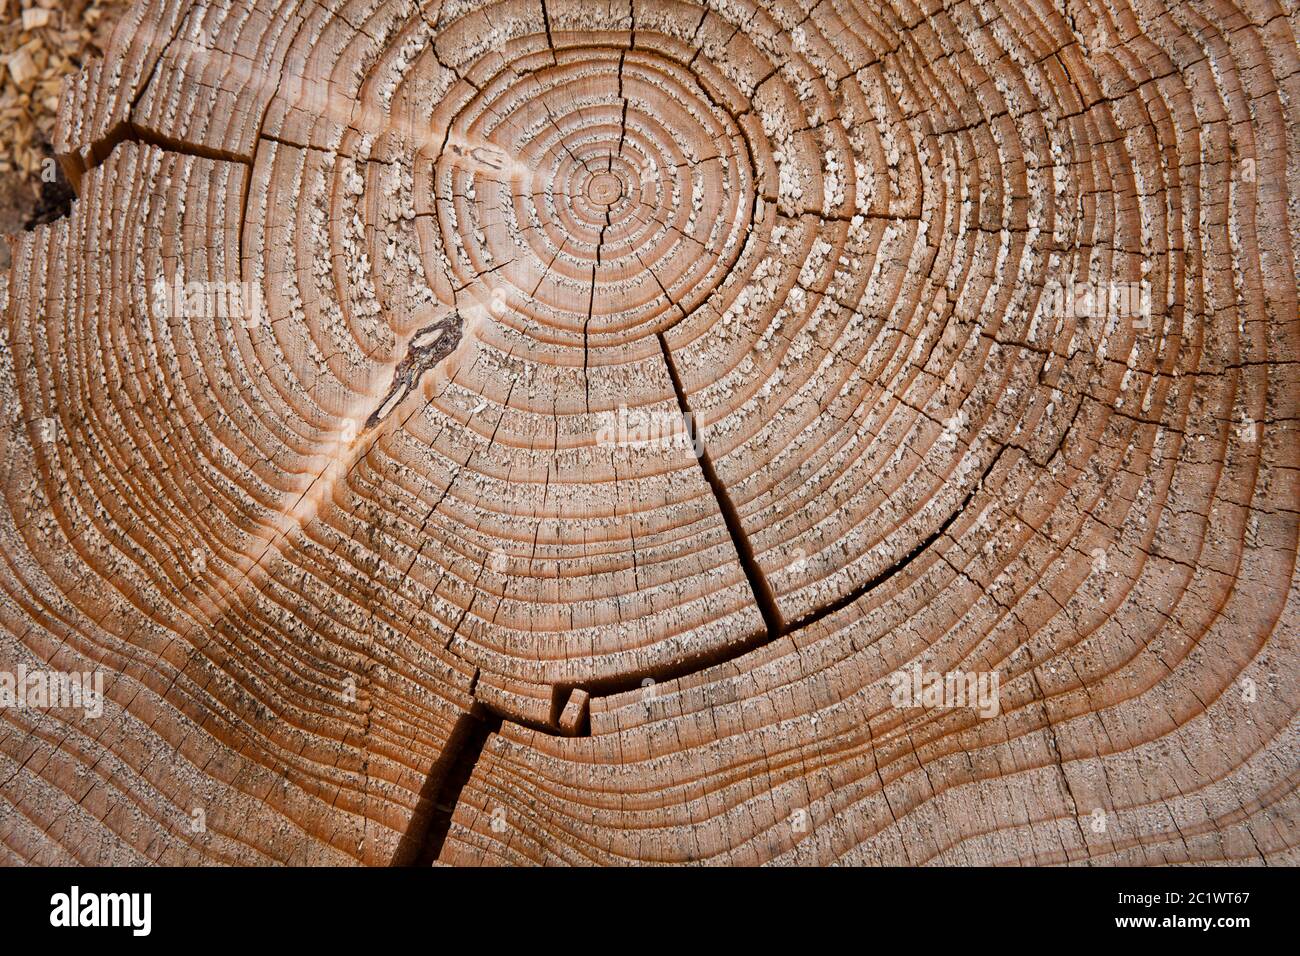 annual growth rings on a stump of wood | Instagram